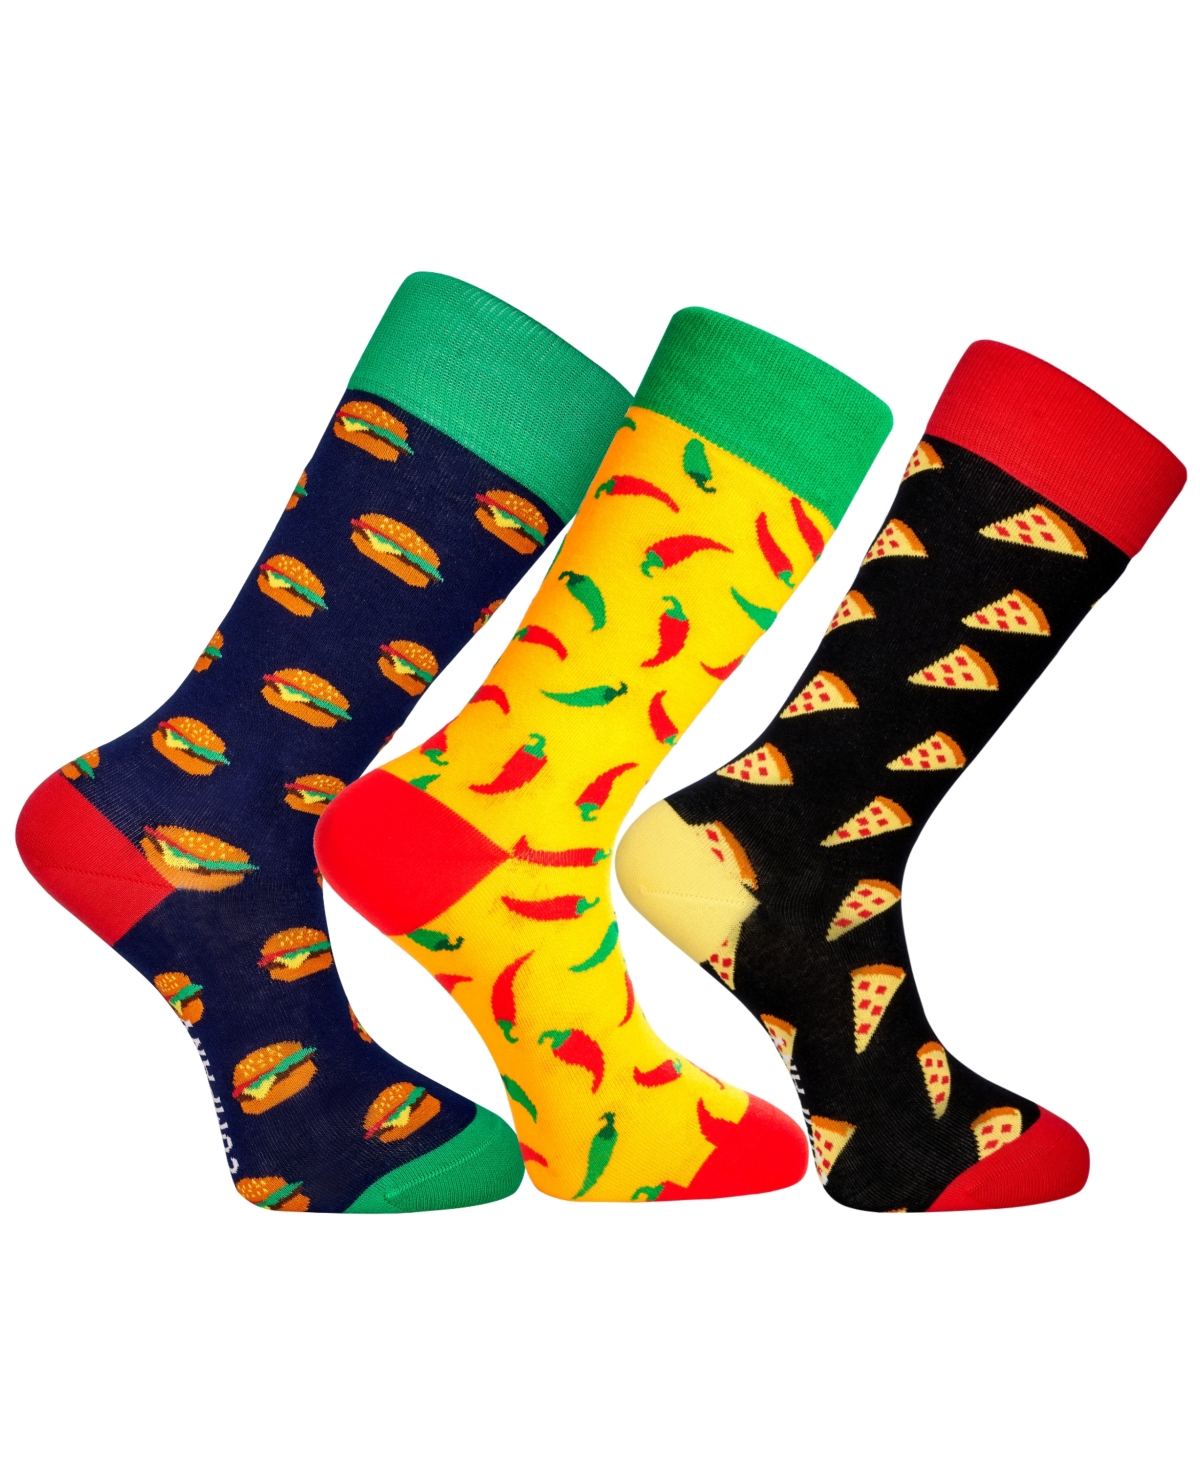 Men's Houston Novelty Luxury Crew Socks Bundle Fun Colorful with Seamless Toe Design, Pack of 3 - Multi Color